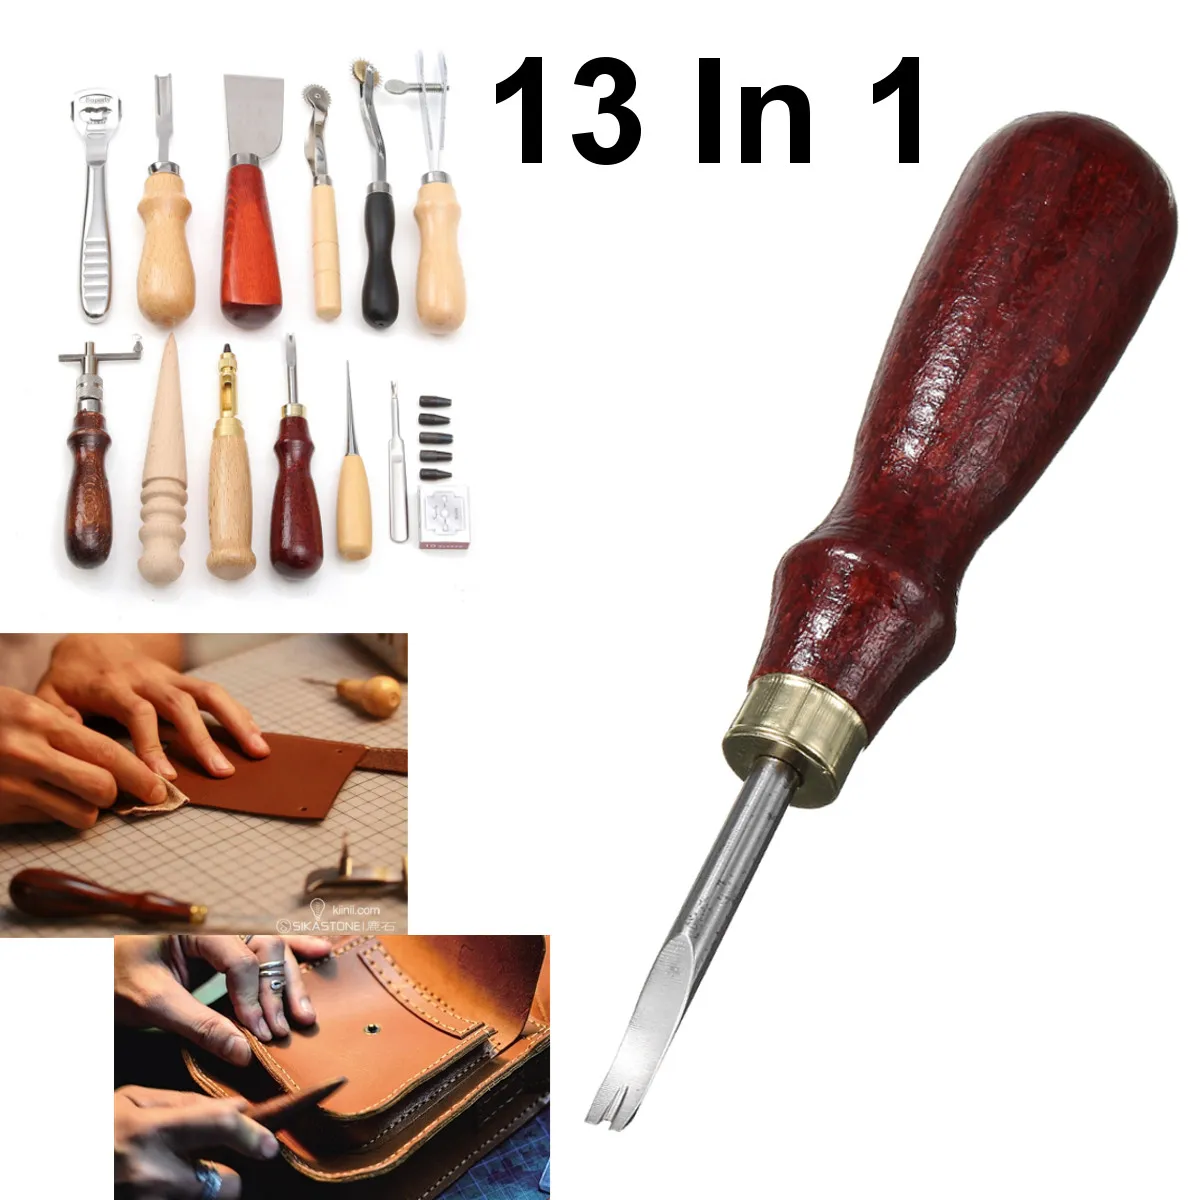 Professional Leather Leather Craft Tool Kit Kit For Bag Making Hand Sewing,  Stitching, Punchinging And Carving Work From Ao43, $30.67